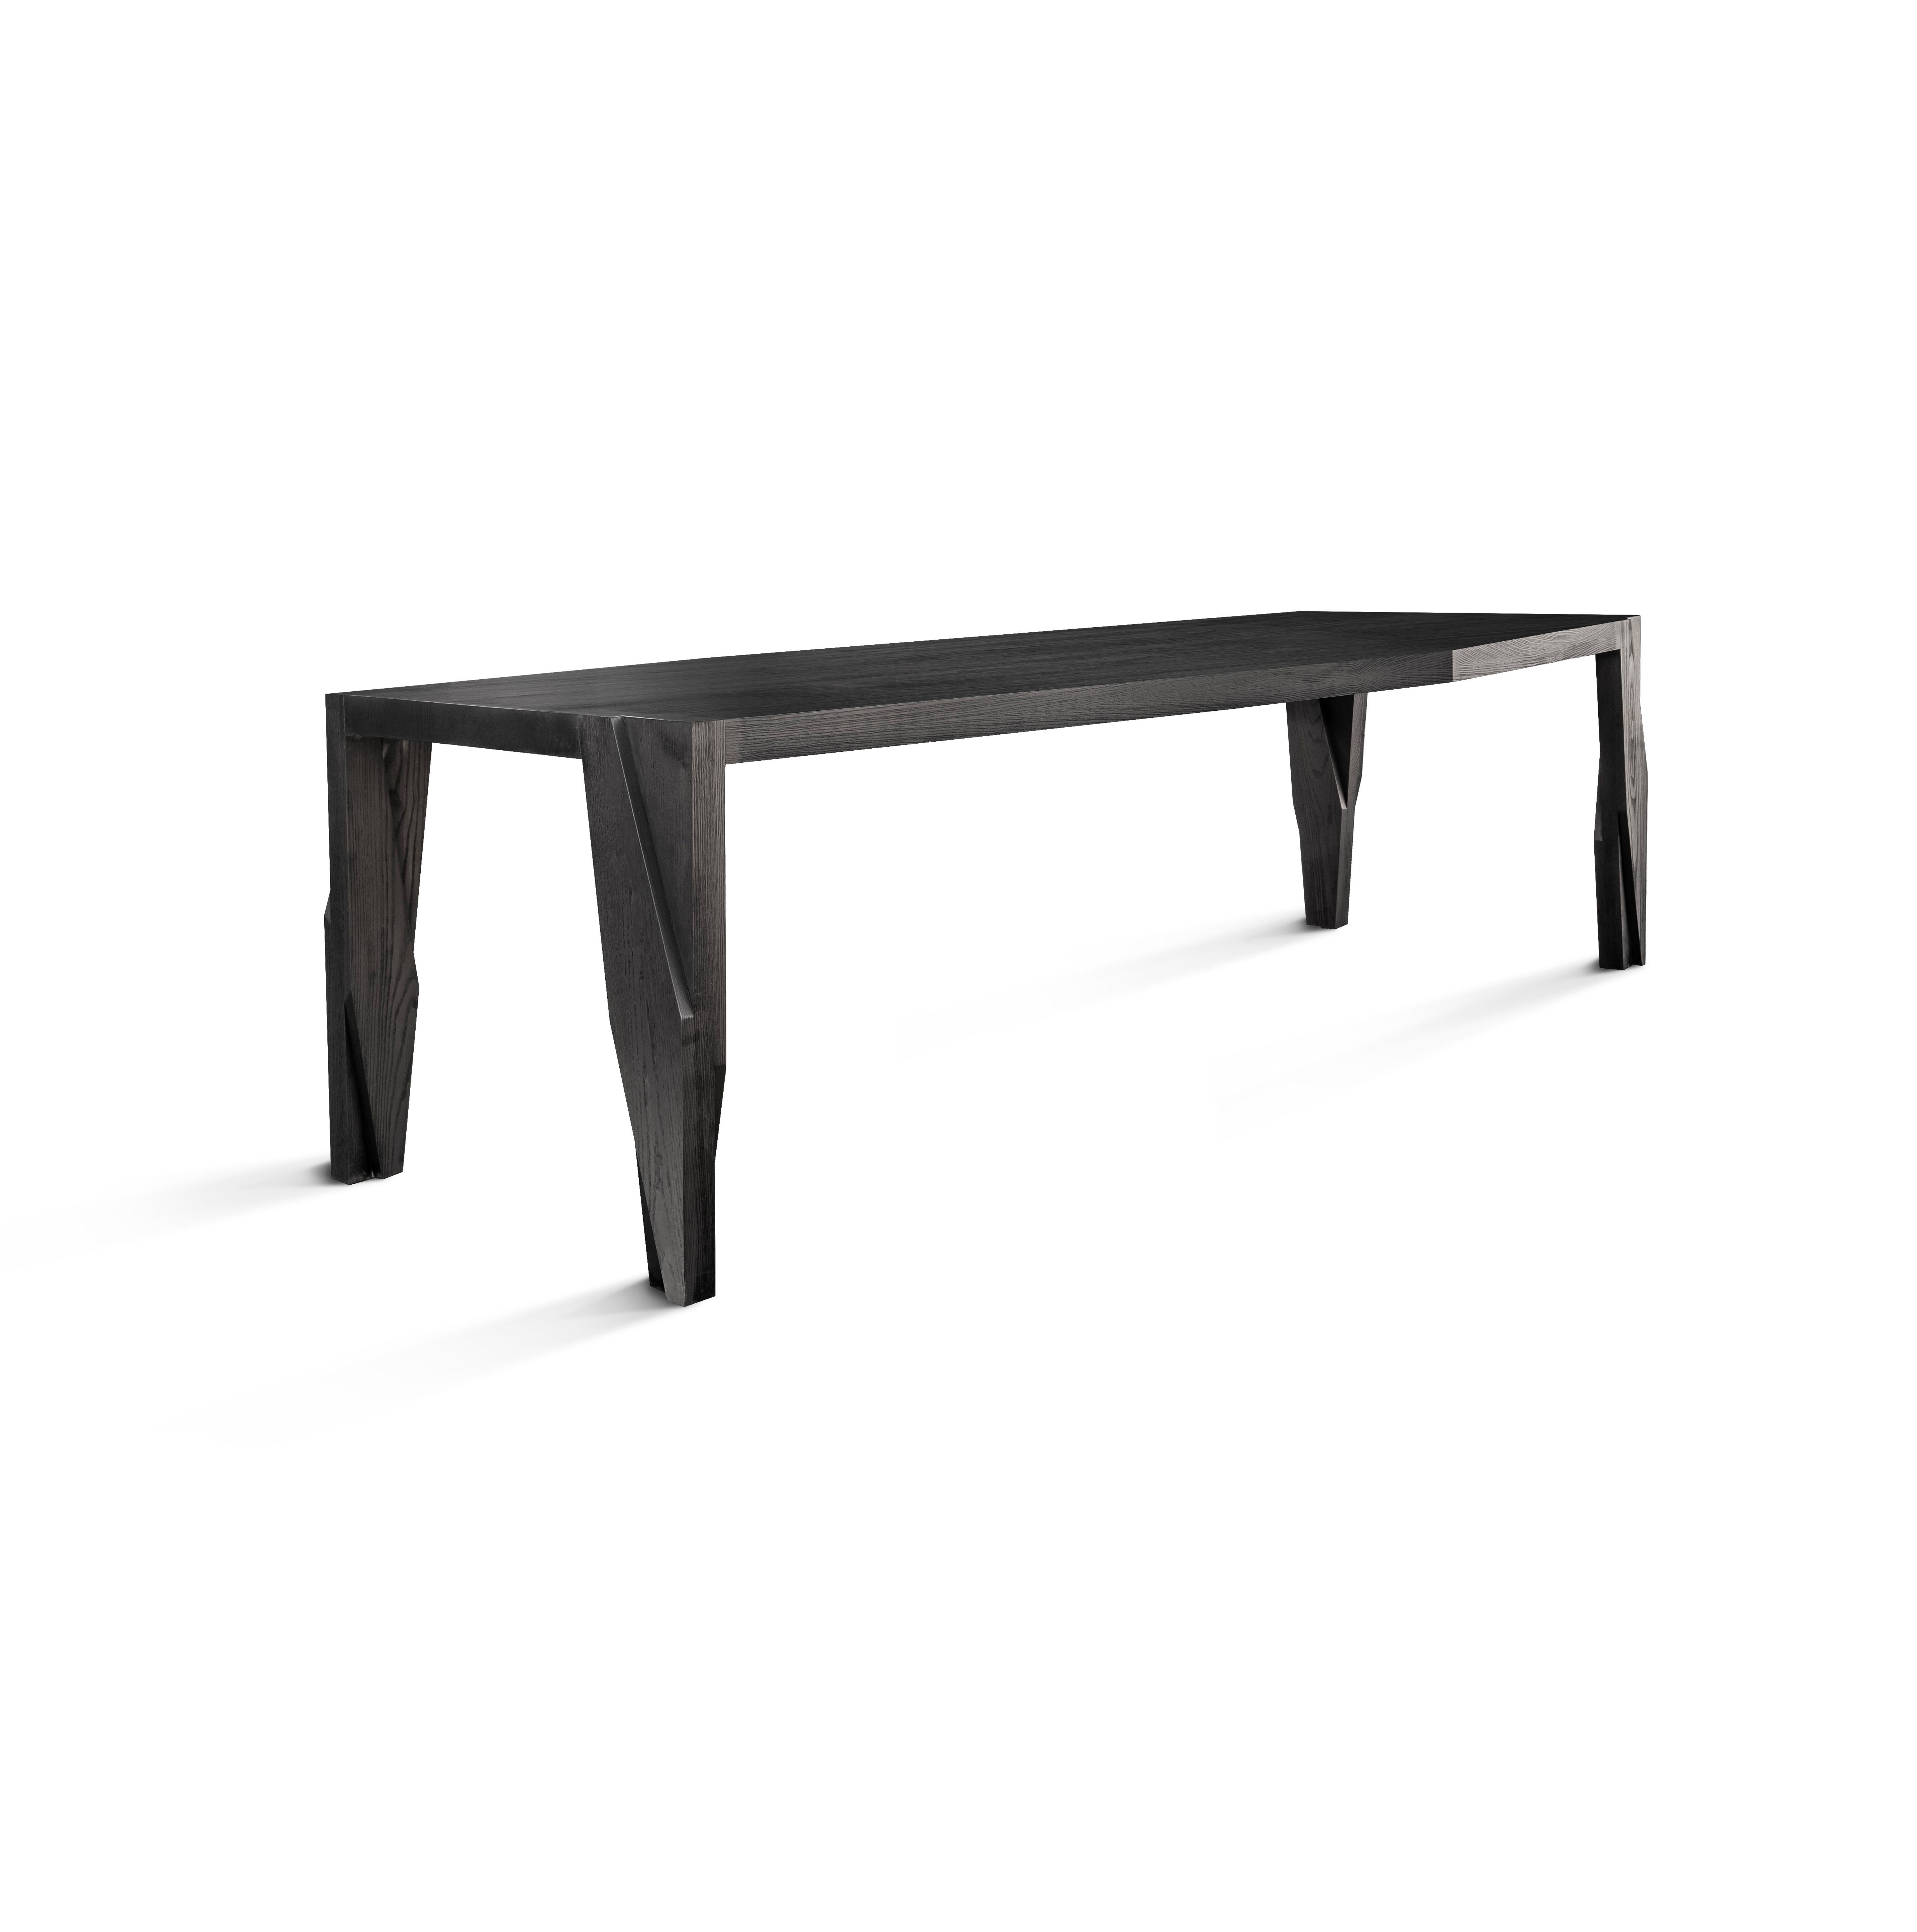 Portuguese Contemporary Black Wooden 6 Seater Dining Table, Moramour by Adam Court for Okha For Sale